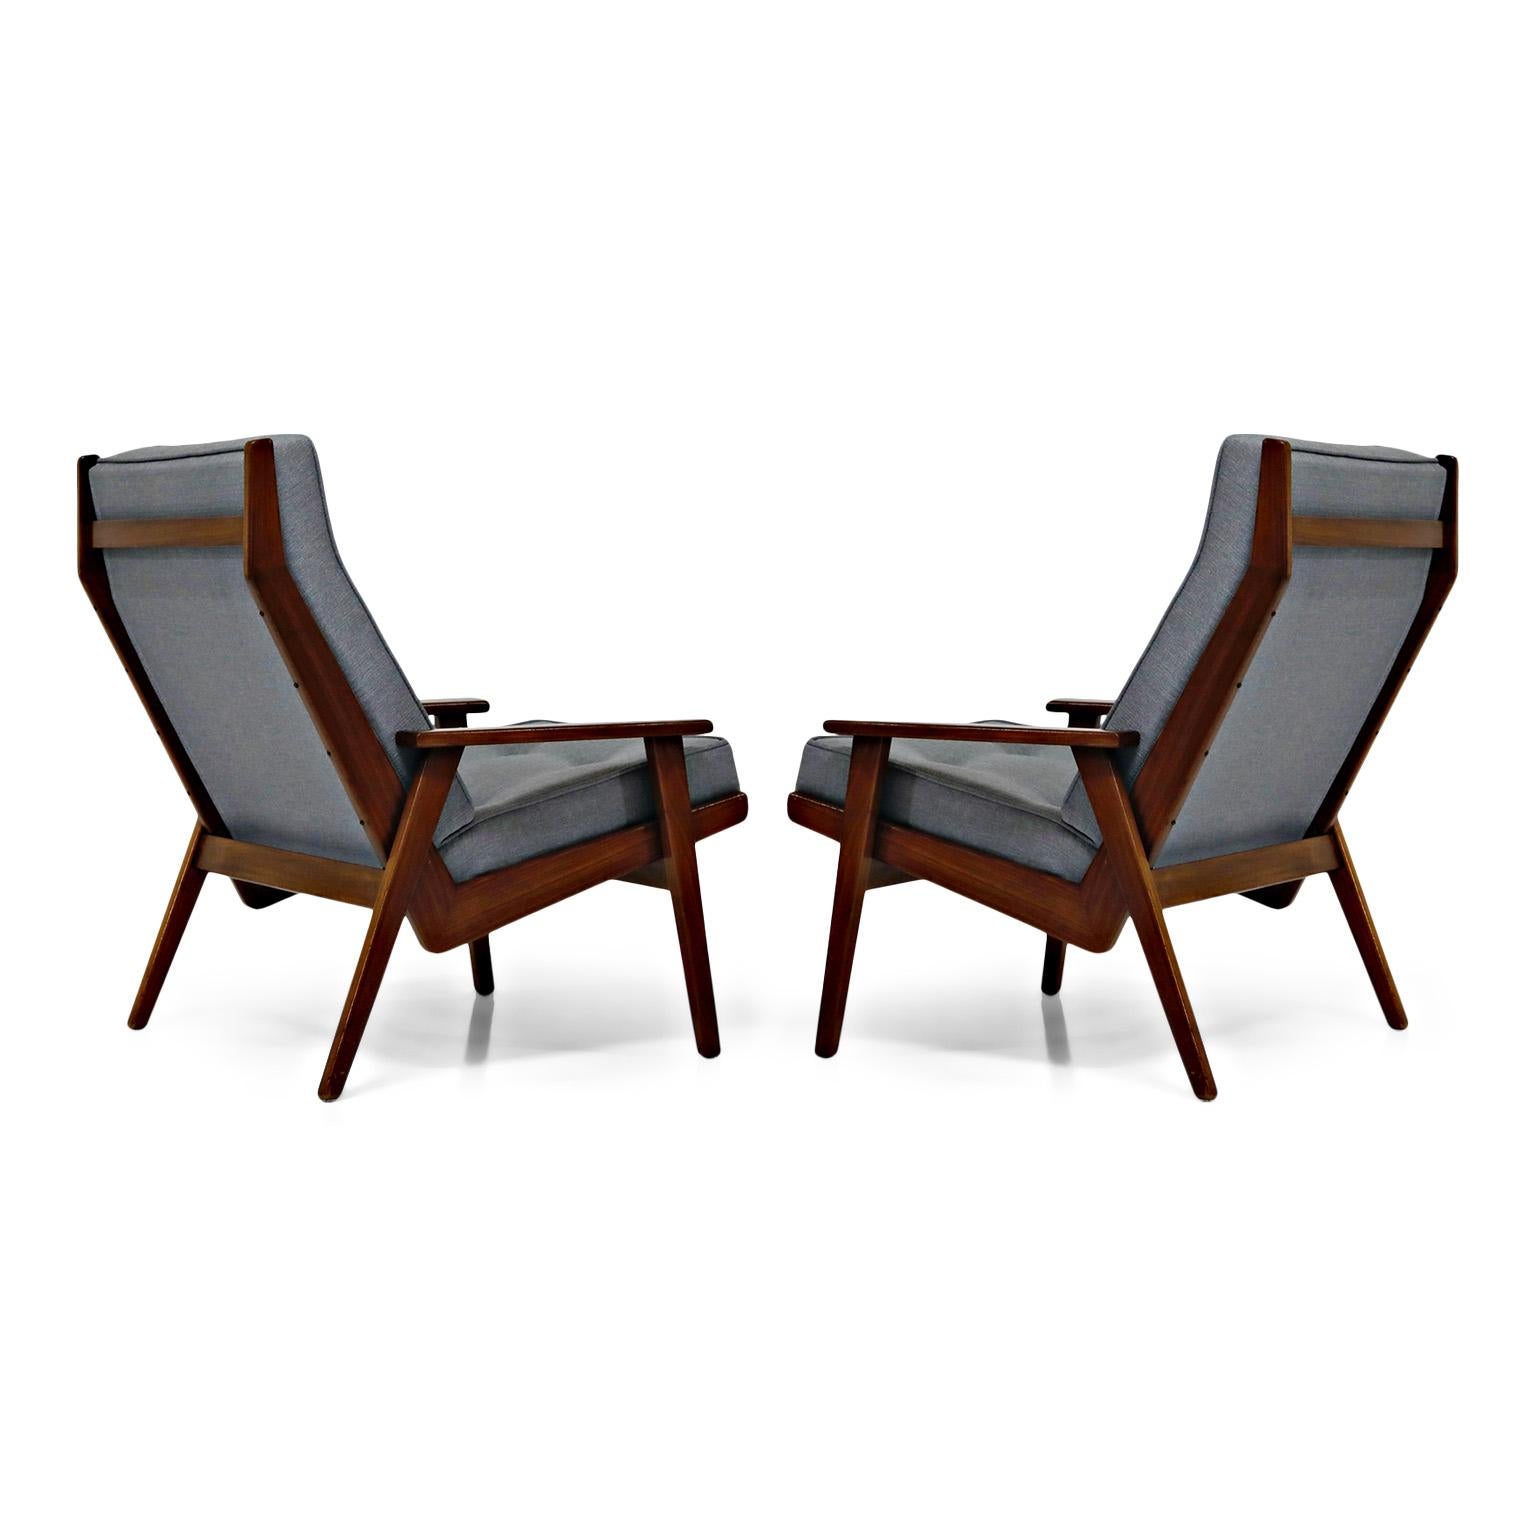 Fabric Pair of Lotus Chairs by Robert Parry for Gelderland, Denmark 1950s, Restored